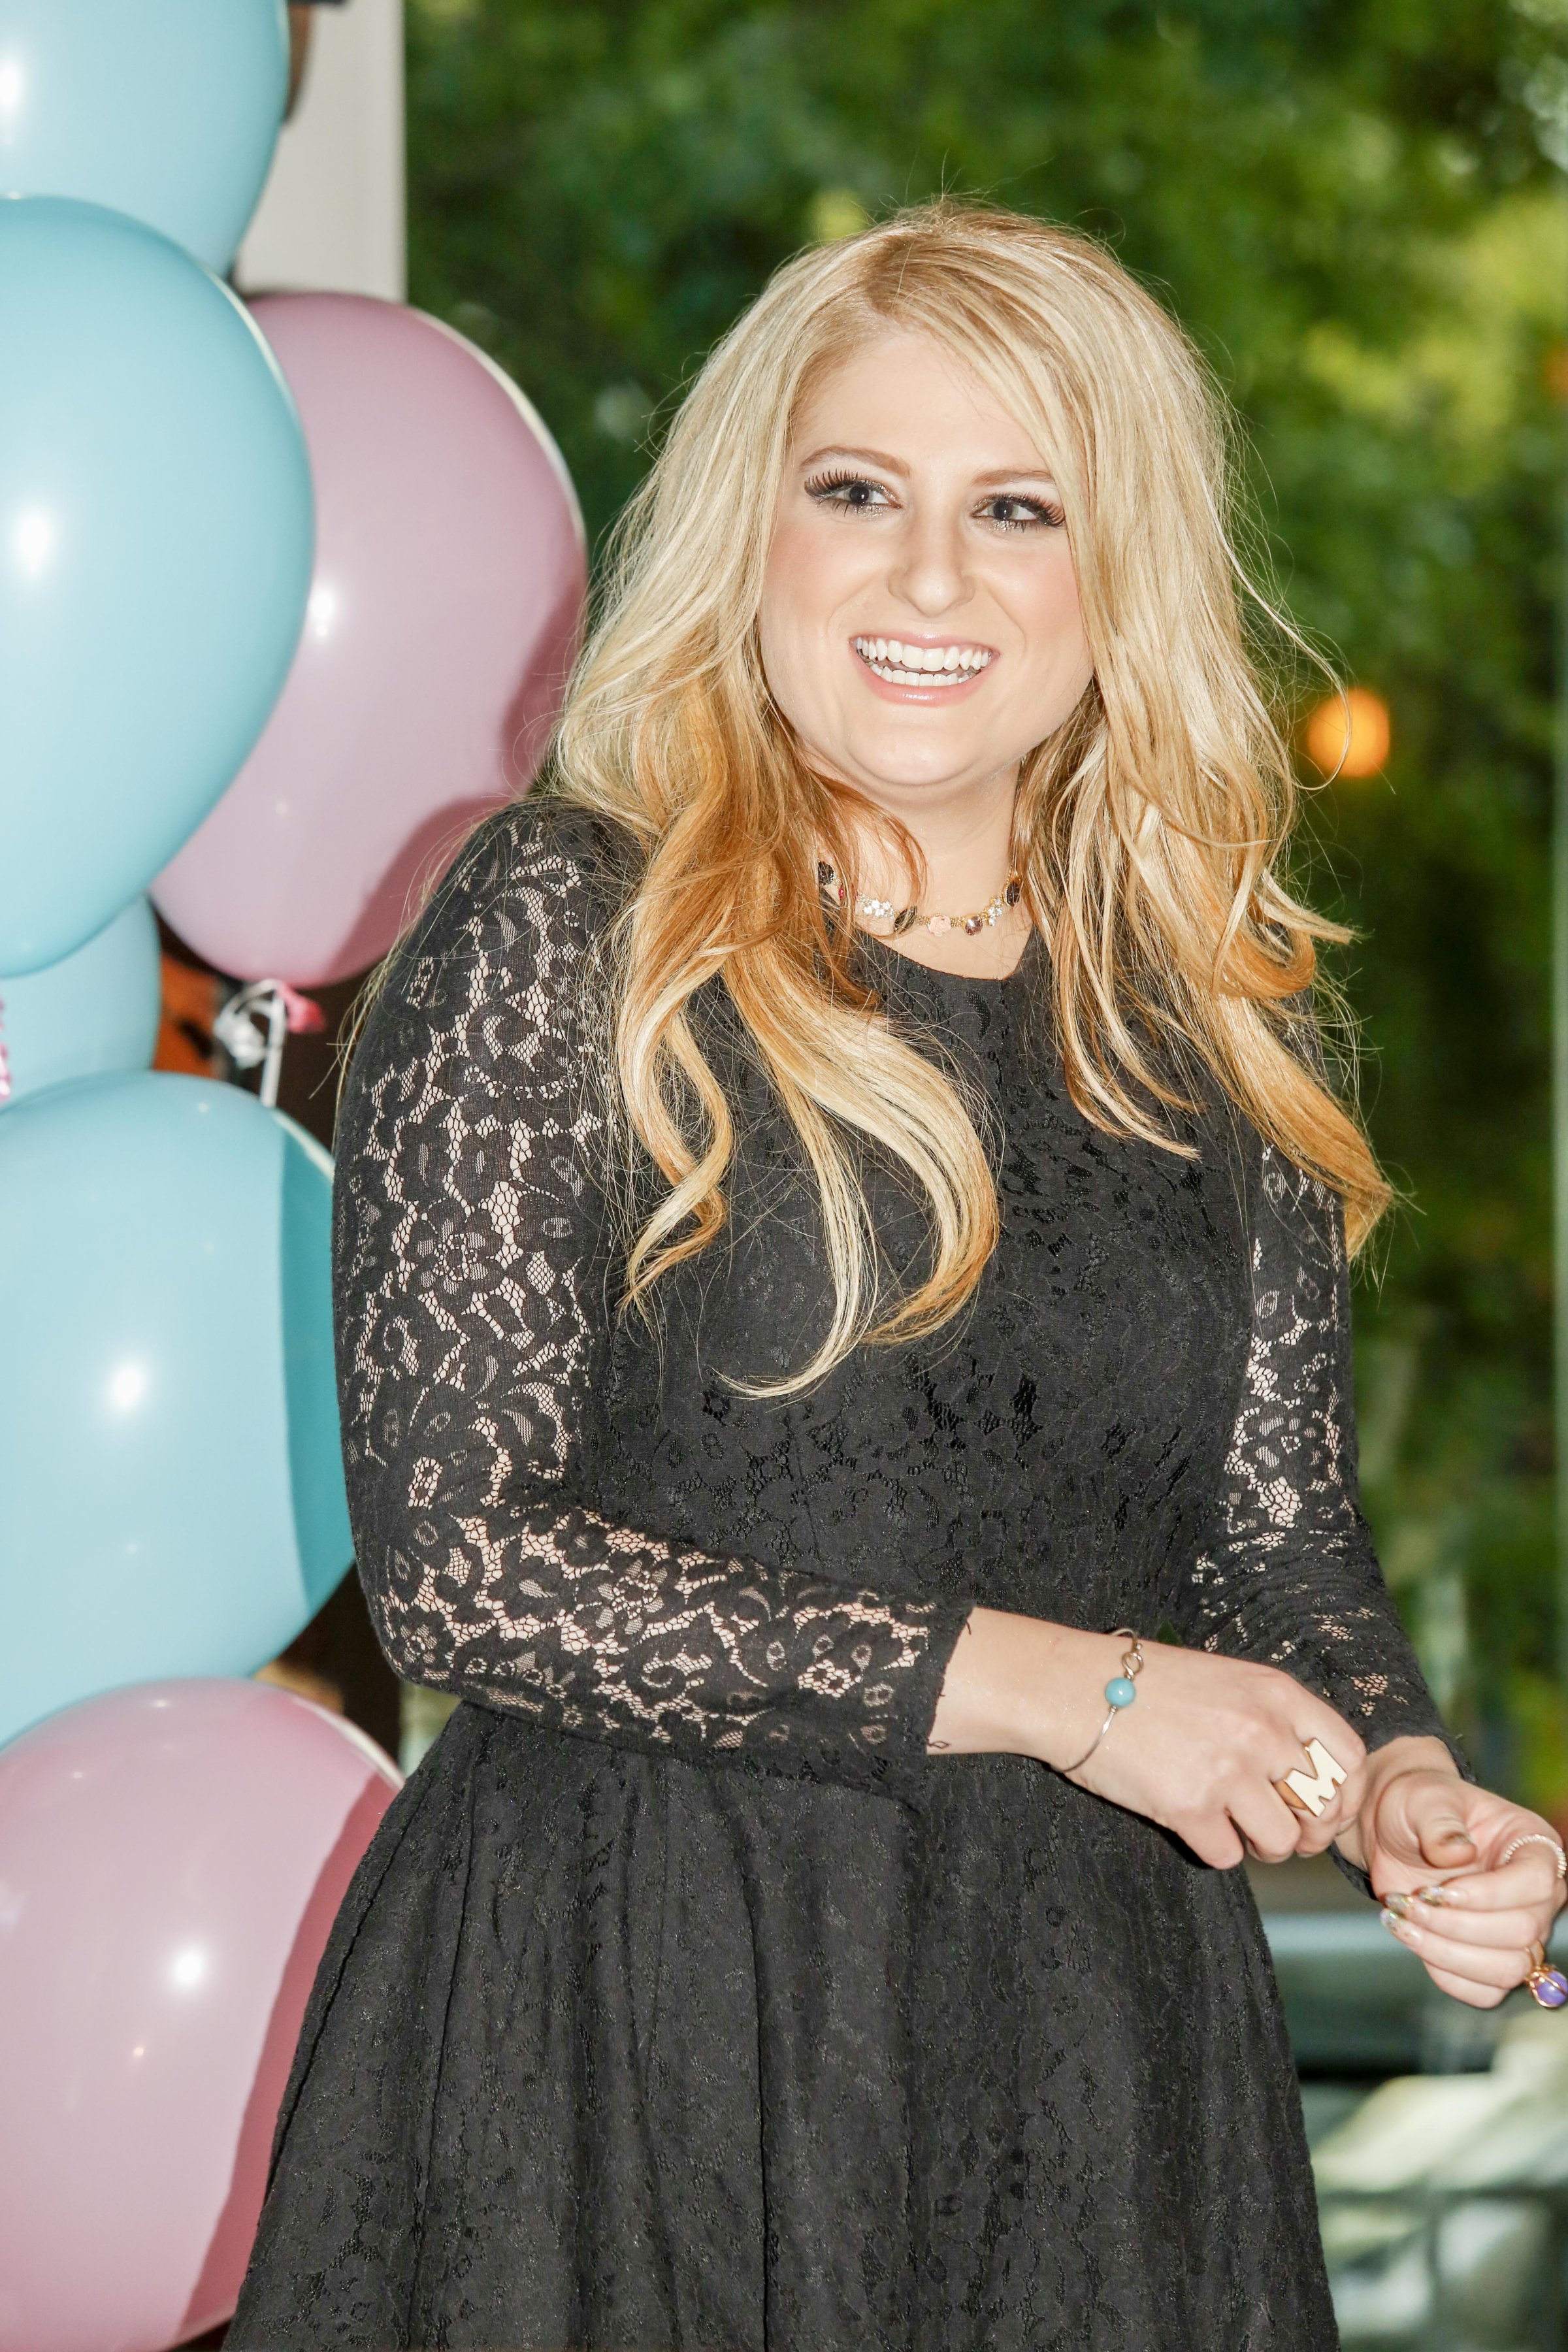 Meghan Trainor attends the "All About That Bass" #1 Party on October 14, 2014 in Nashville, Tennessee.